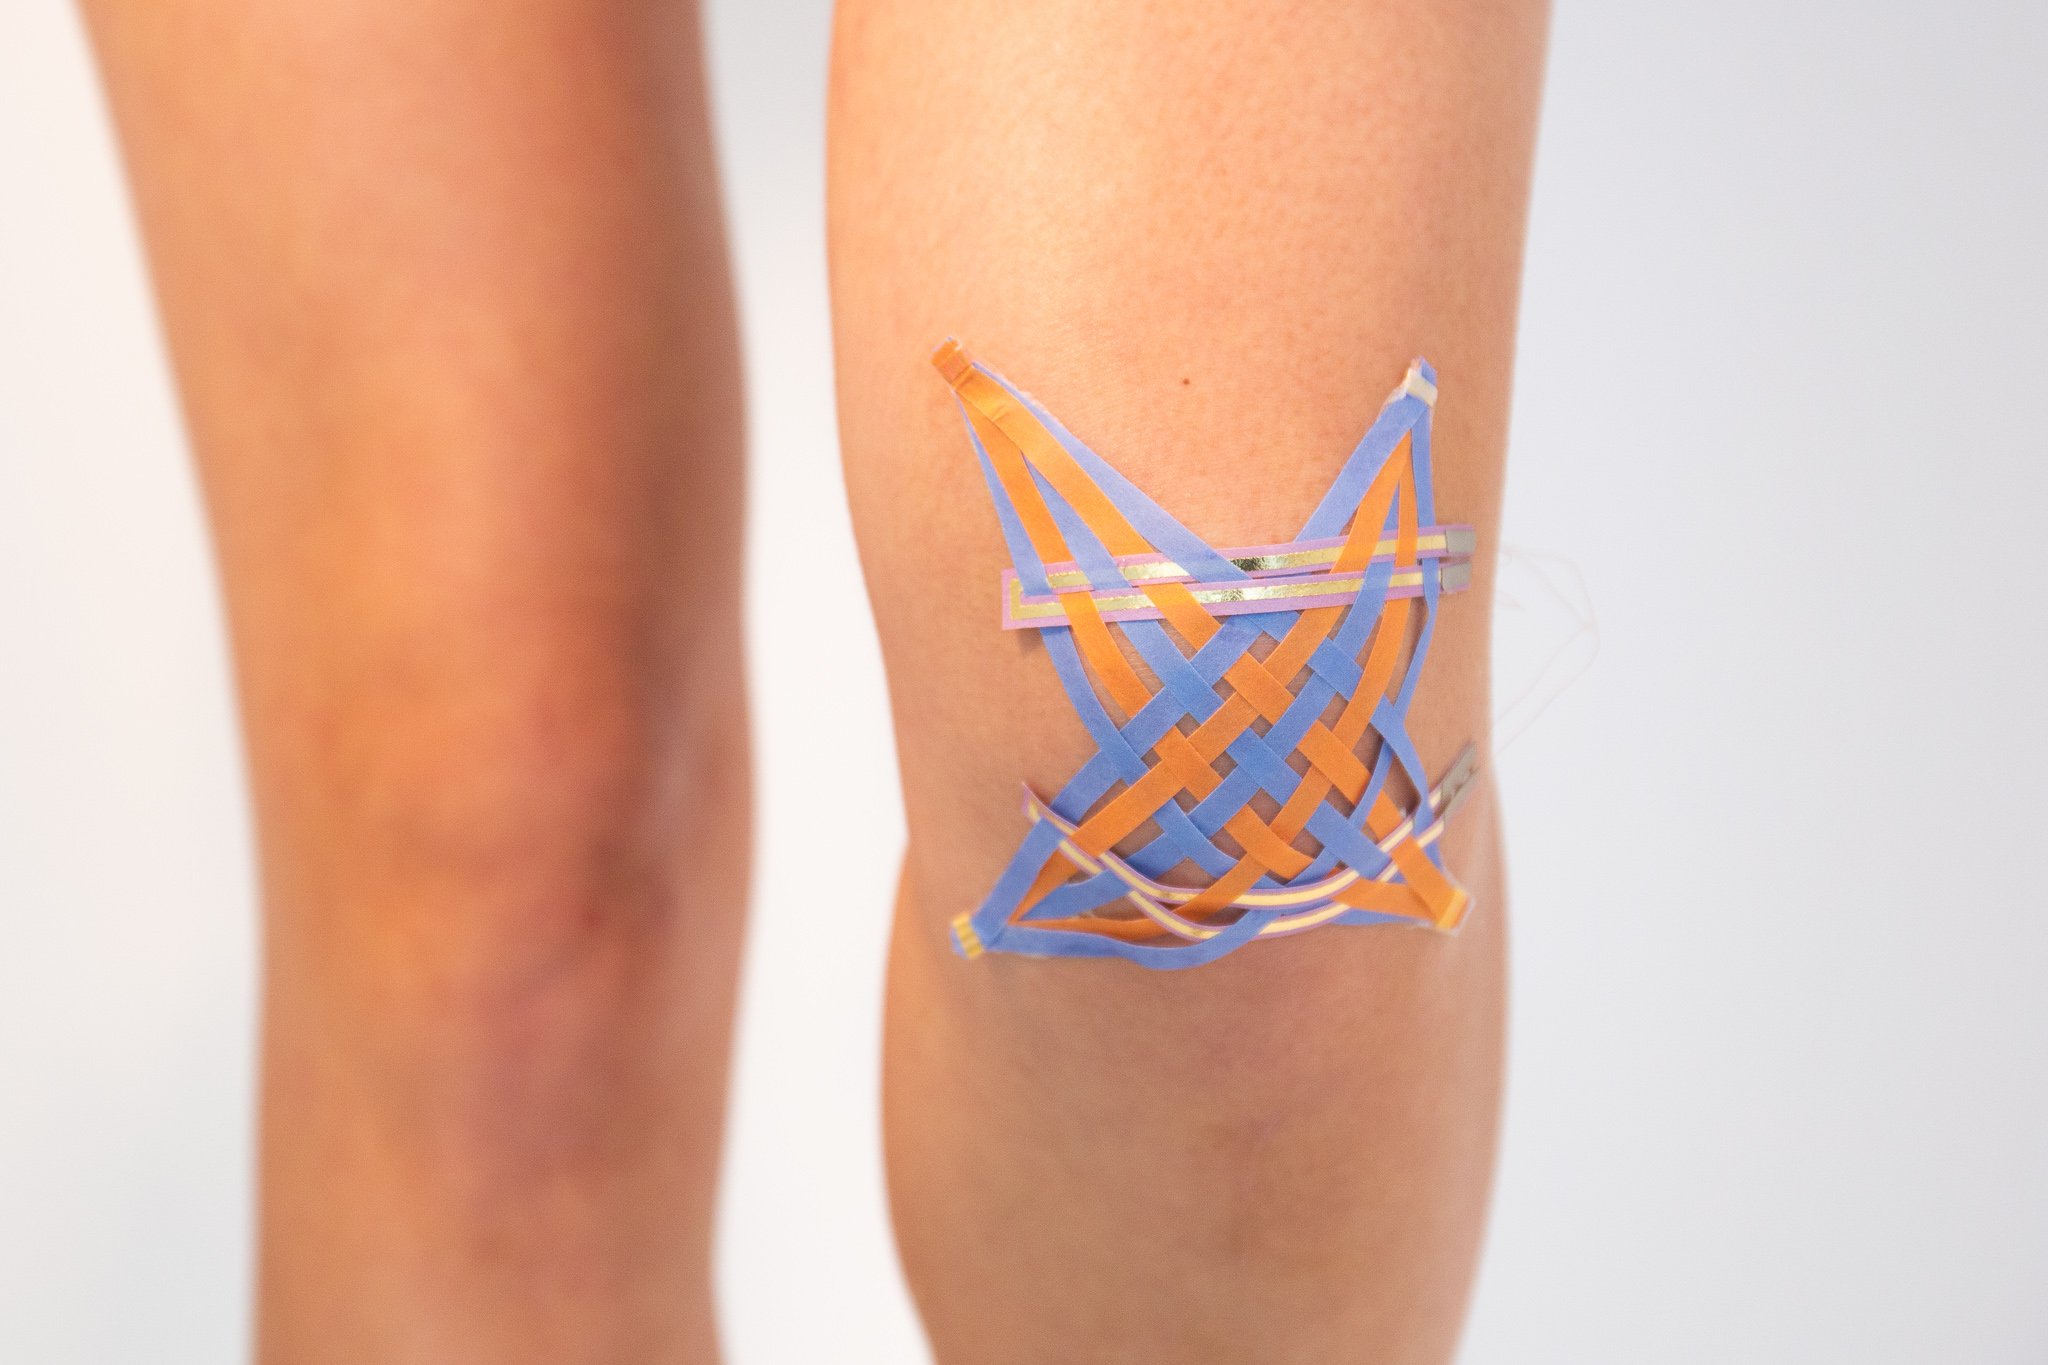  Example of SkinPaper interface: 3D Knee Heating Patch in Concave Structure.  (Image Credit: Hybrid Body Lab) (License: CC BY-NC-SA 4.0)   